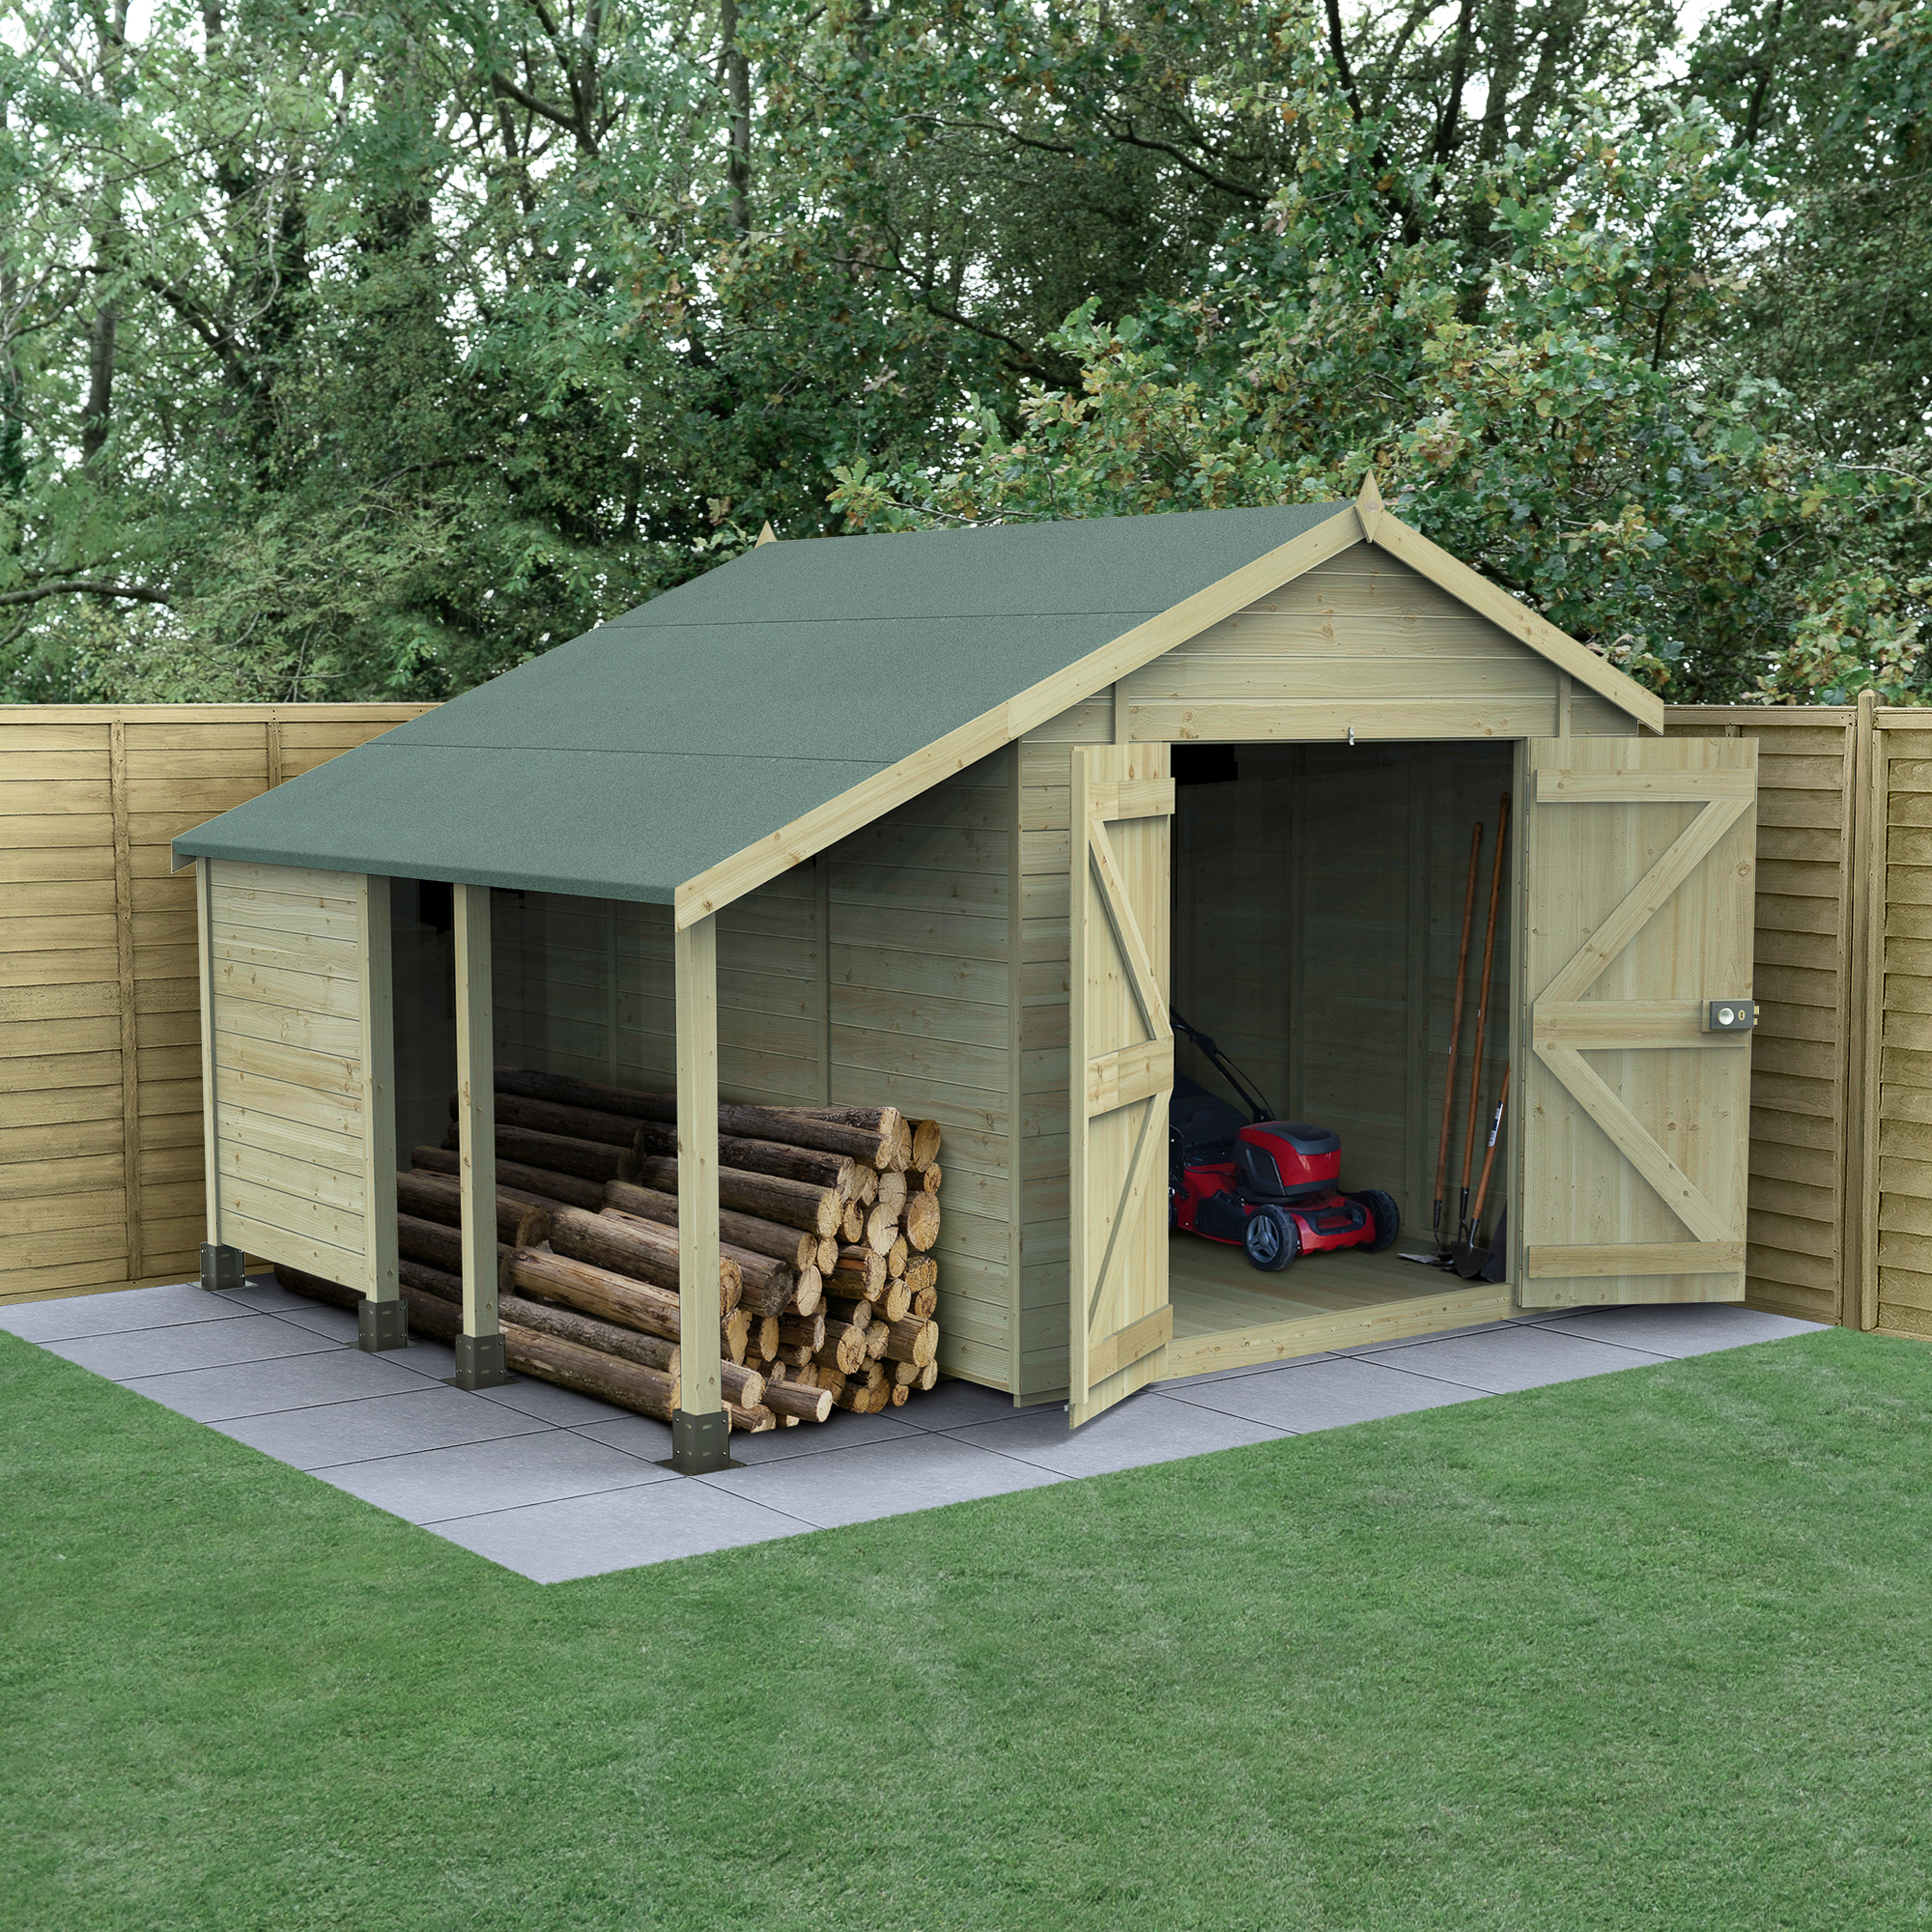 Forest Garden Timberdale 8 x 10ft Apex Tongue & Groove Pressure Treated Double Door Windowless Shed and Log Store